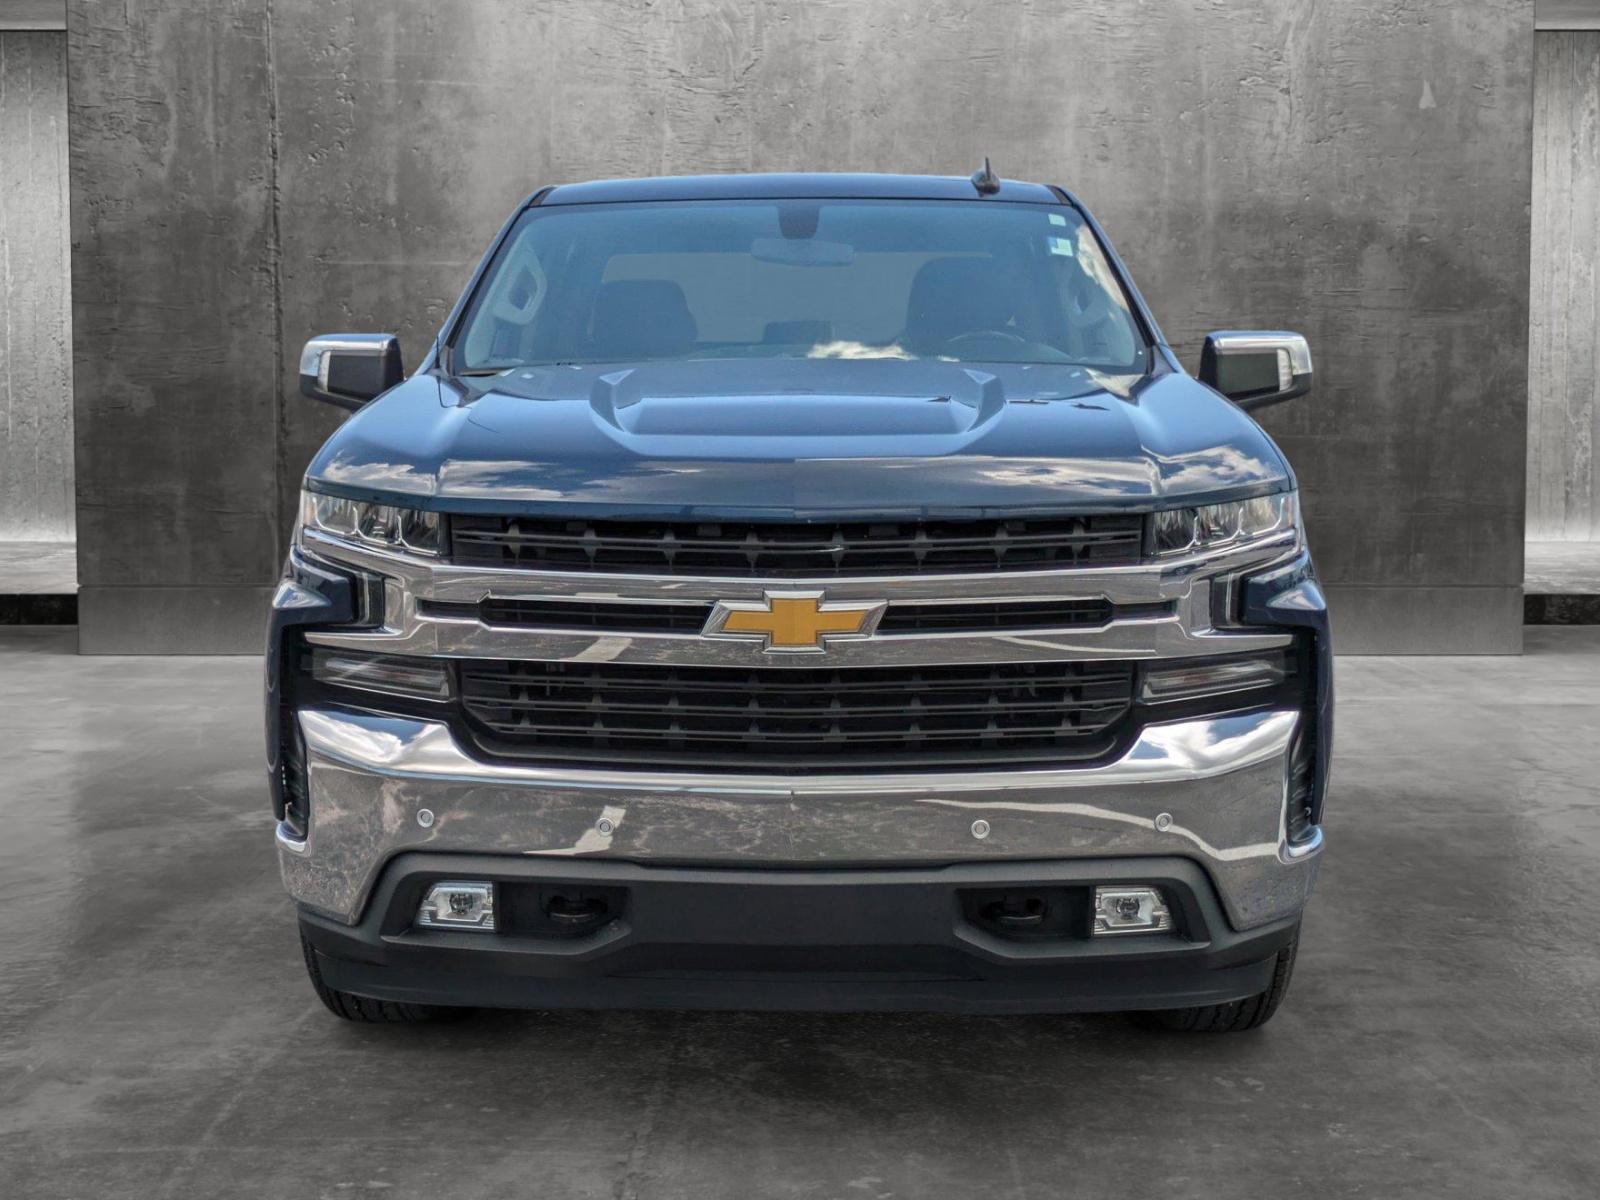 Used 2020 Chevrolet Silverado 1500 LT with VIN 3GCPWCEDXLG213158 for sale in Clearwater, FL